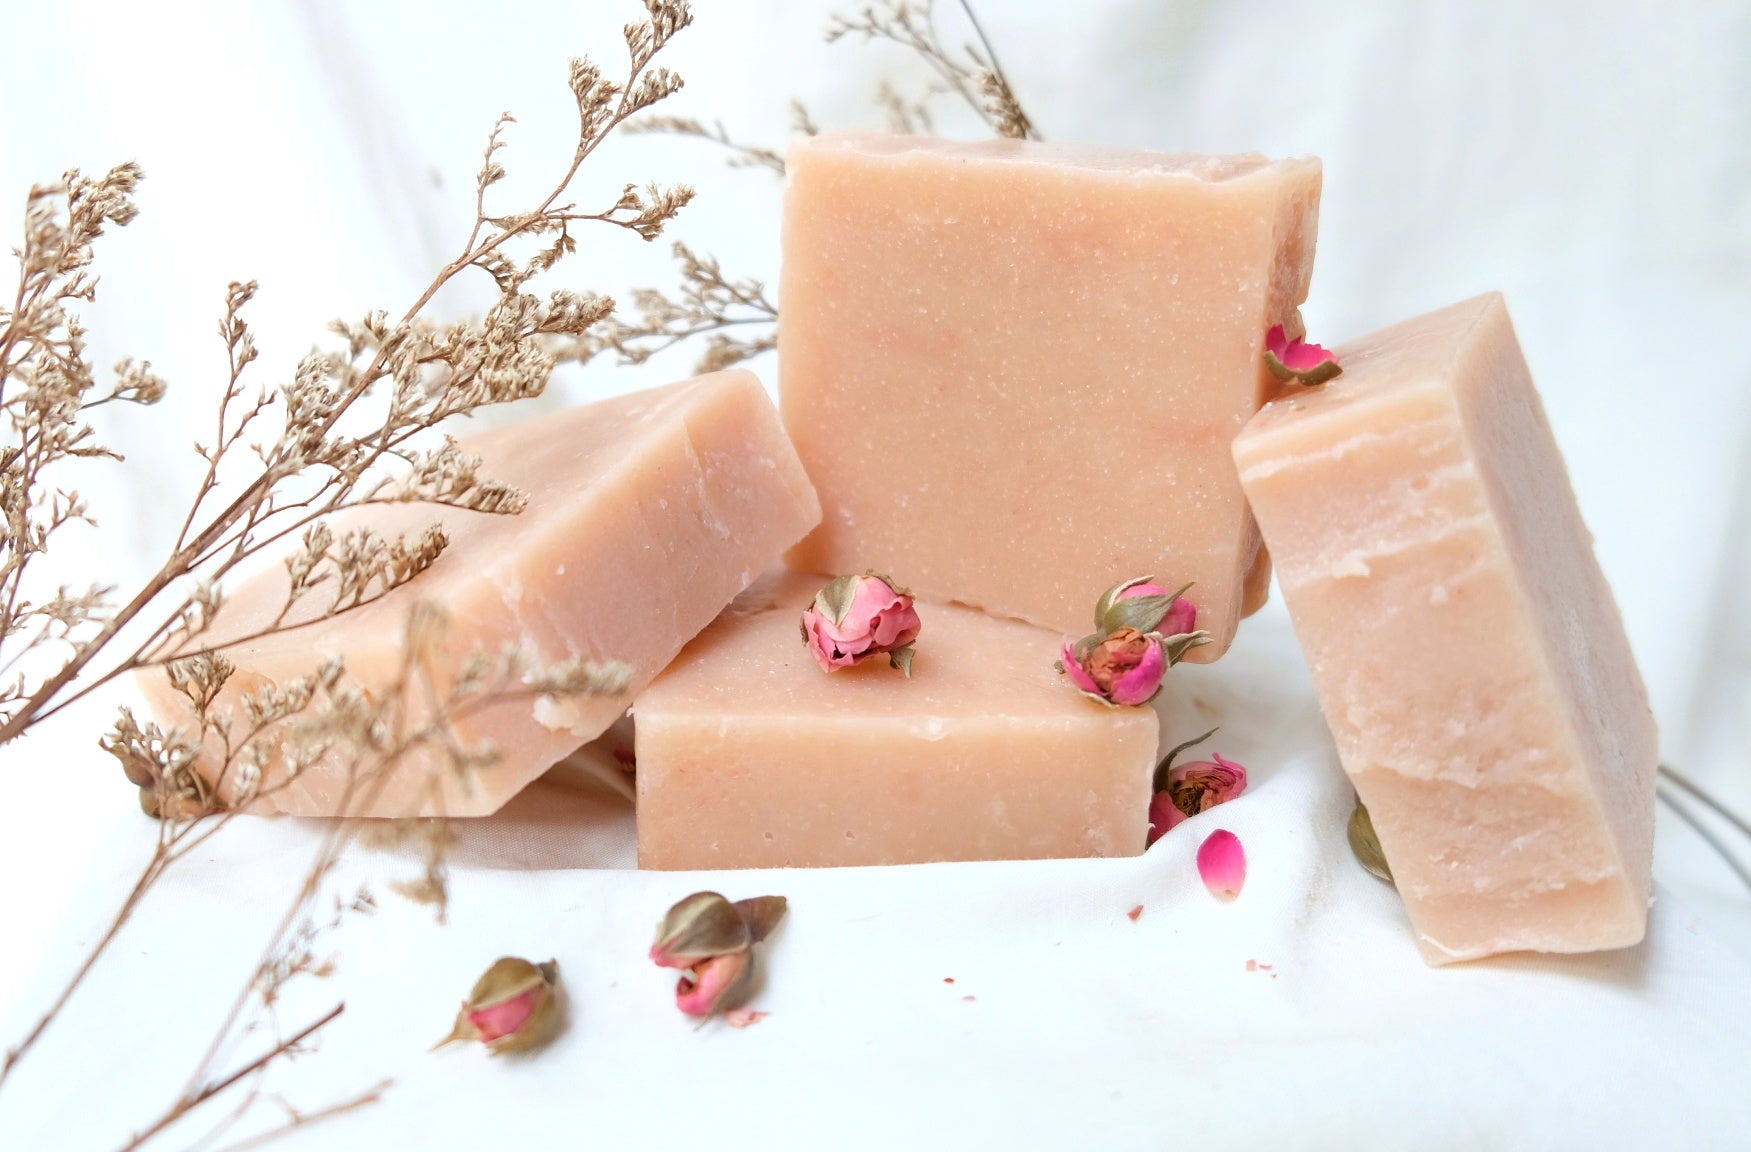 Pre-order 3 weeks lead time: Artisanal Cold-Processed Handmade Soap (8 Pieces)